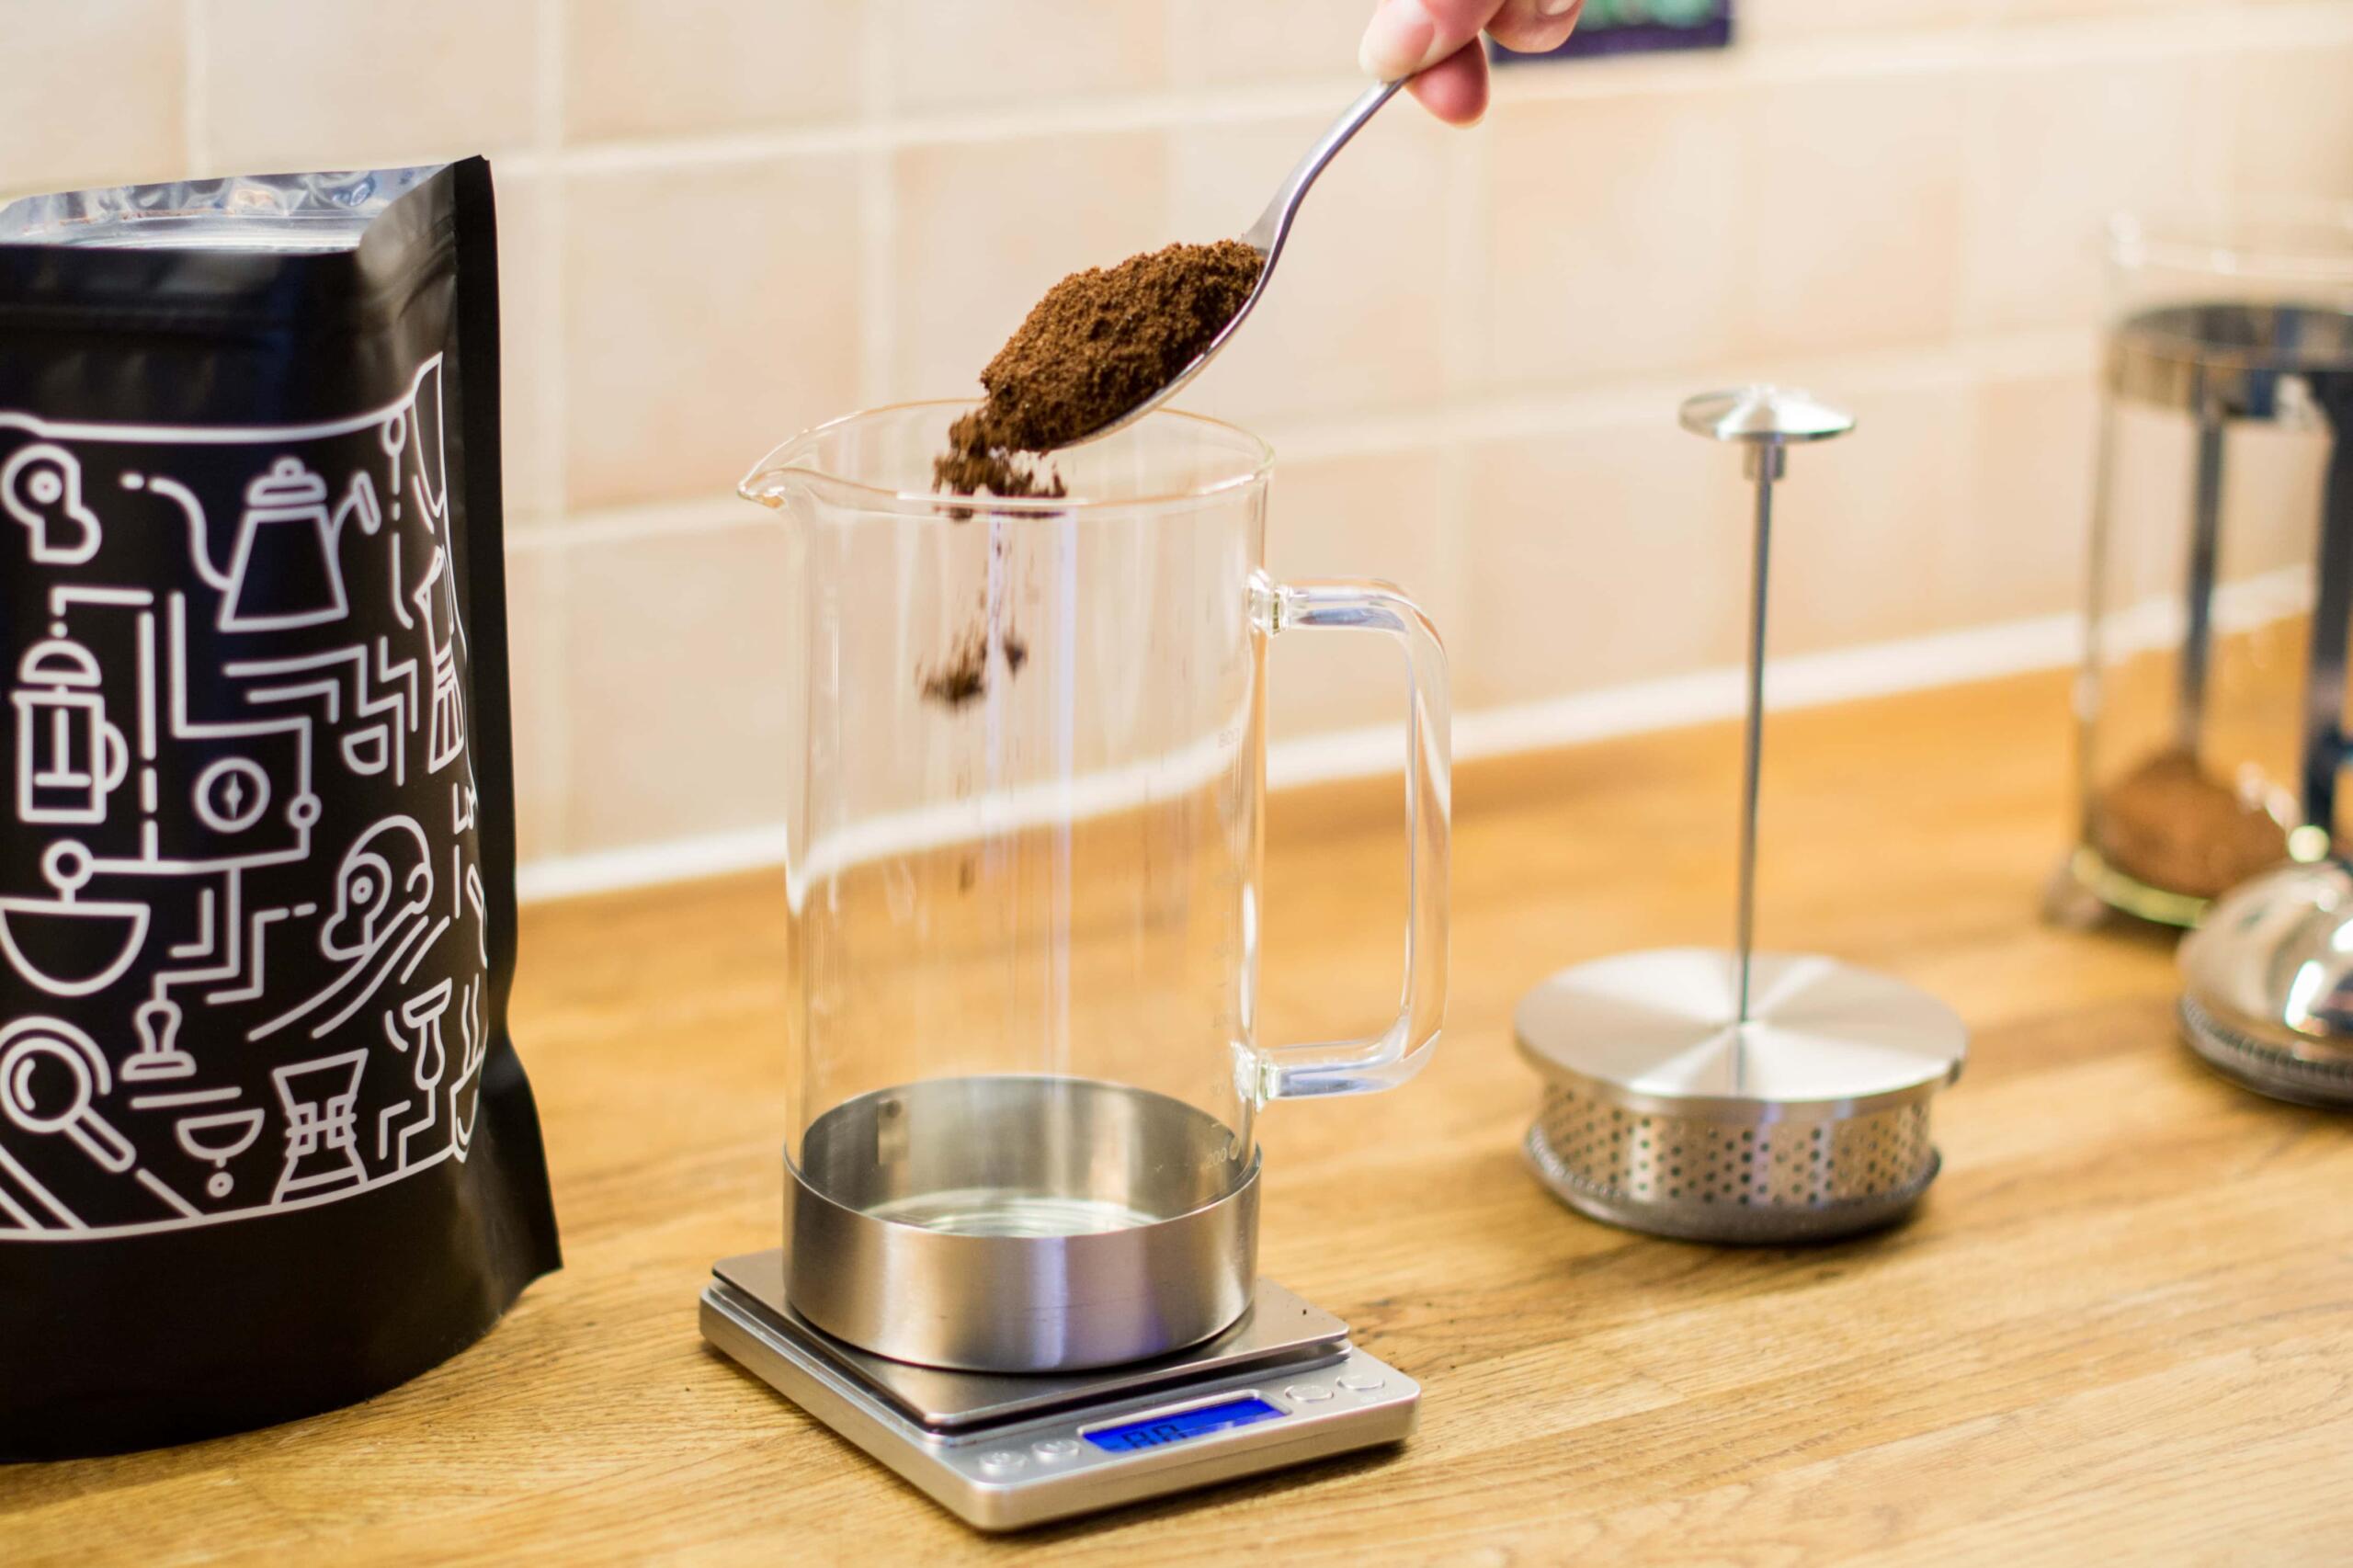 pouring coffee from a spoon into an empty cafetiere